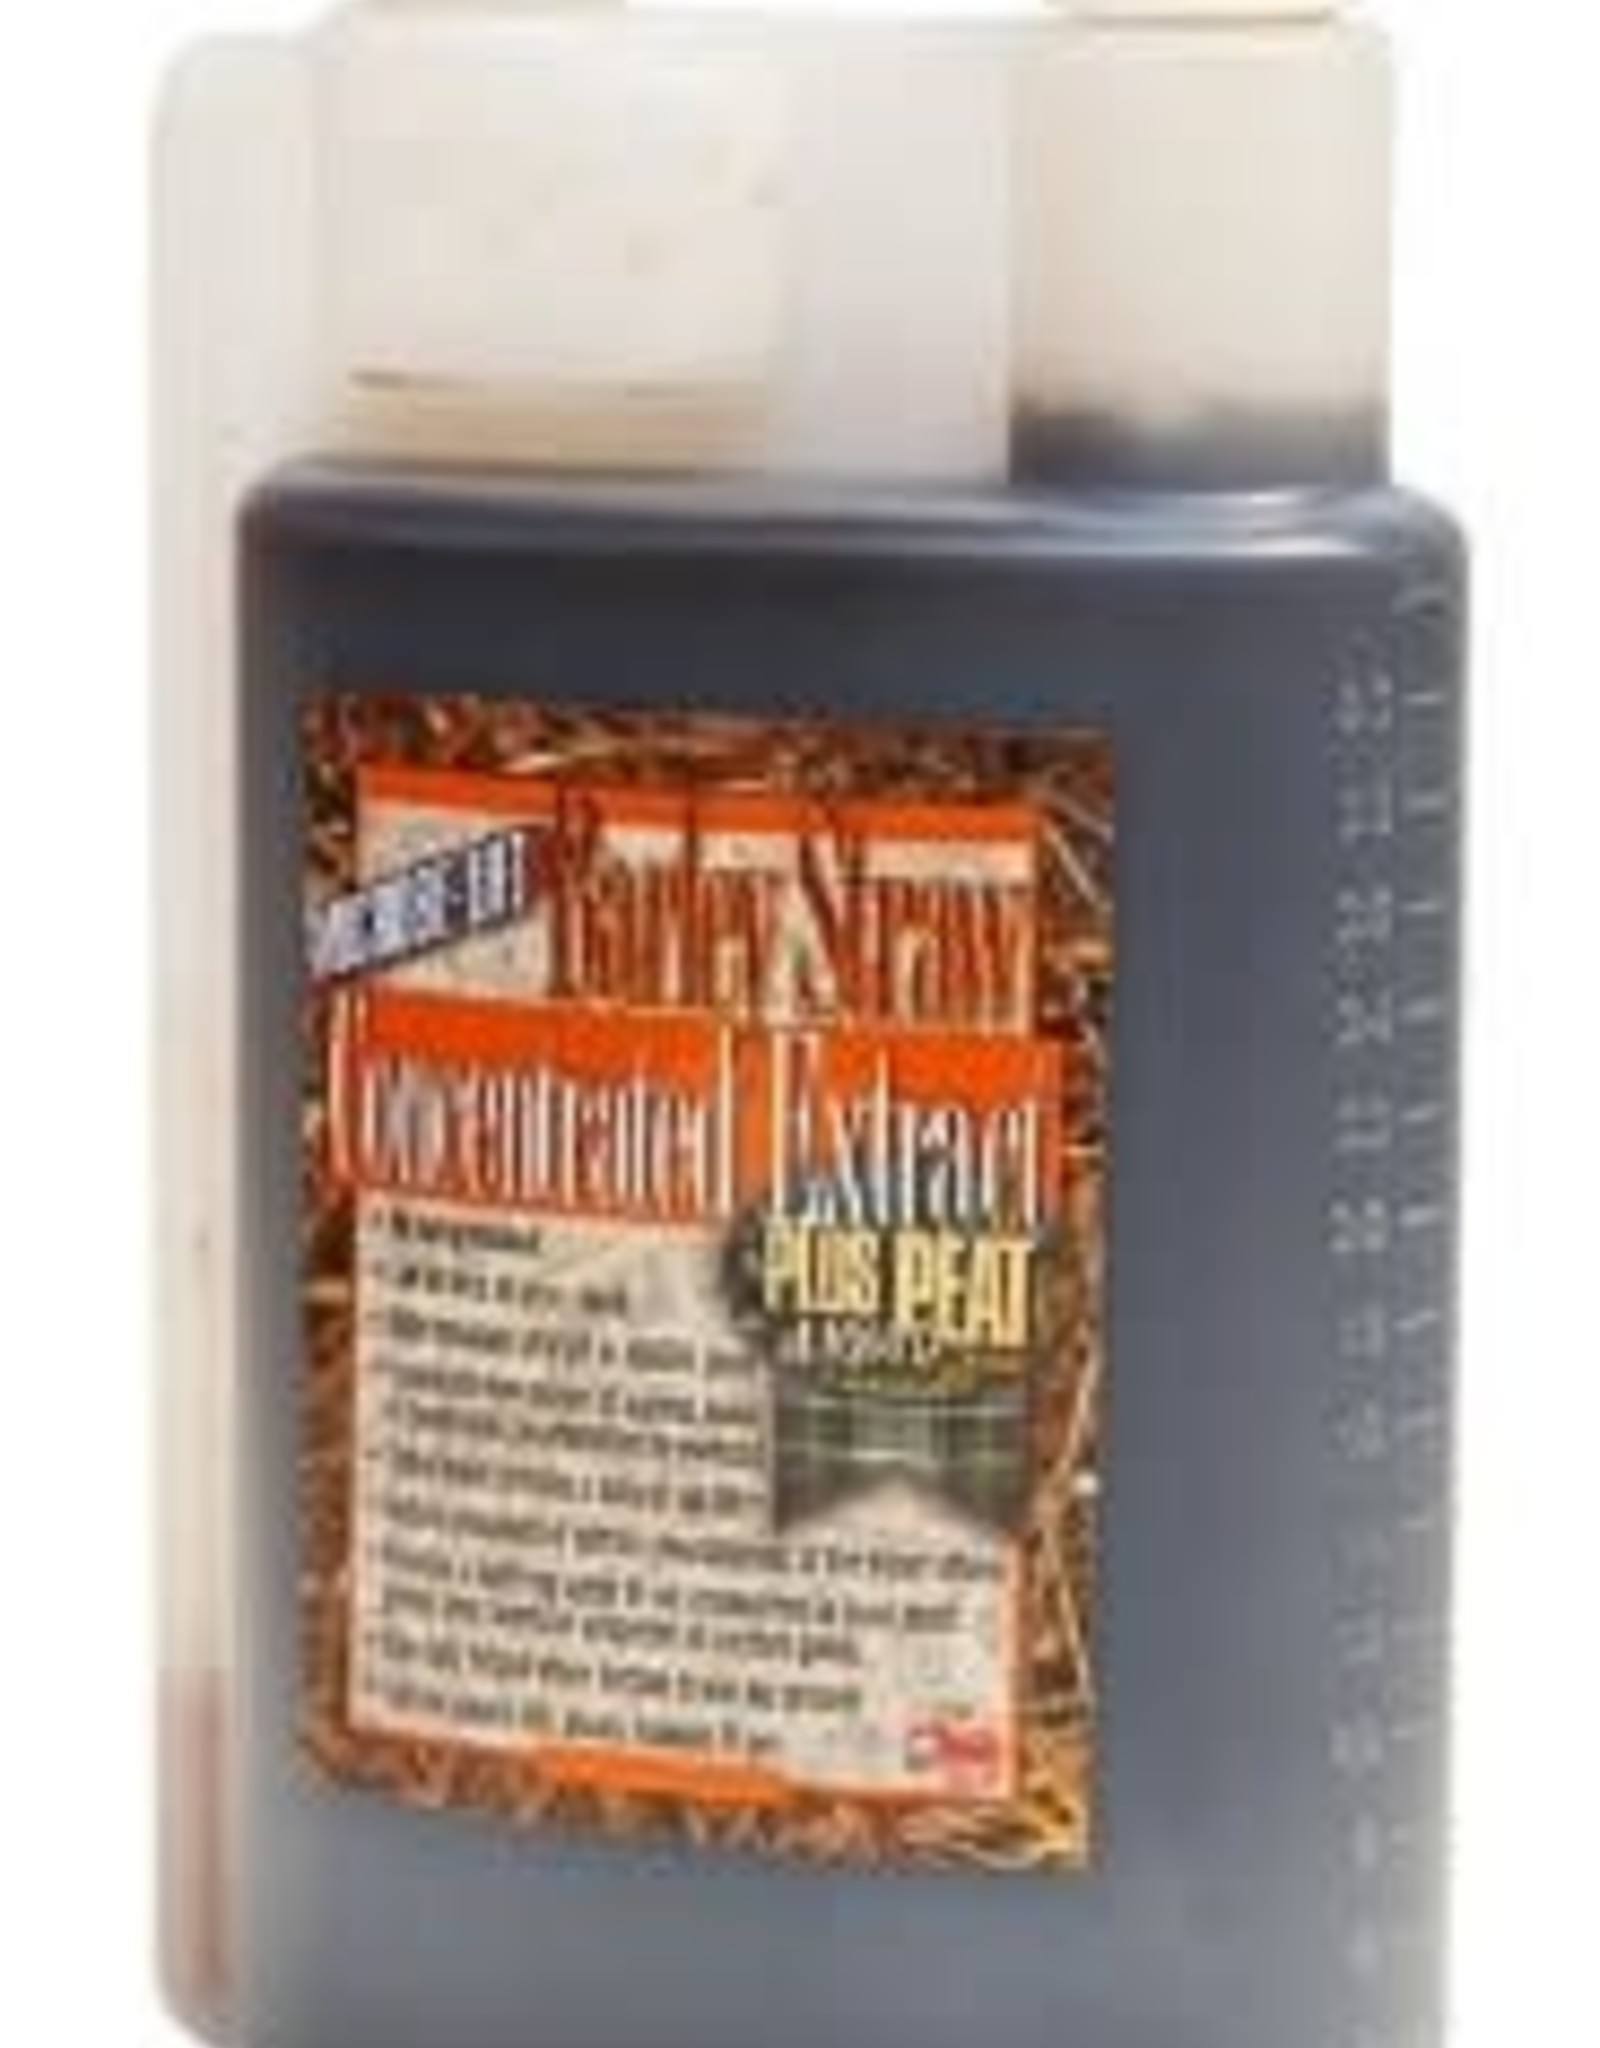 ECOLOGICAL LABS BARLEY STRW + PEAT EXTRACT ML 8OZ